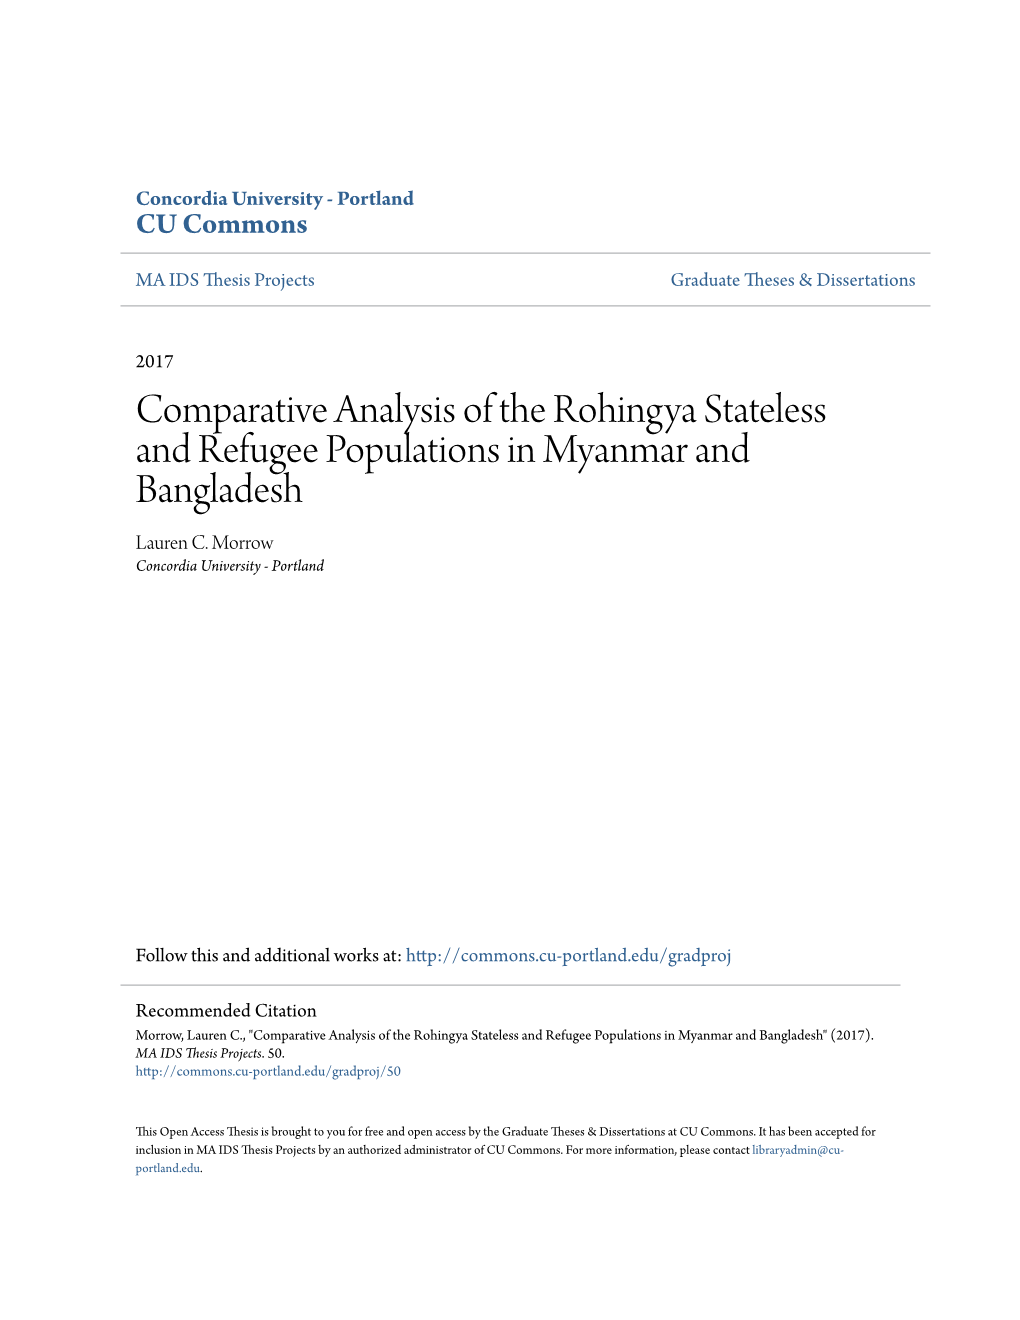 Comparative Analysis of the Rohingya Stateless and Refugee Populations in Myanmar and Bangladesh Lauren C